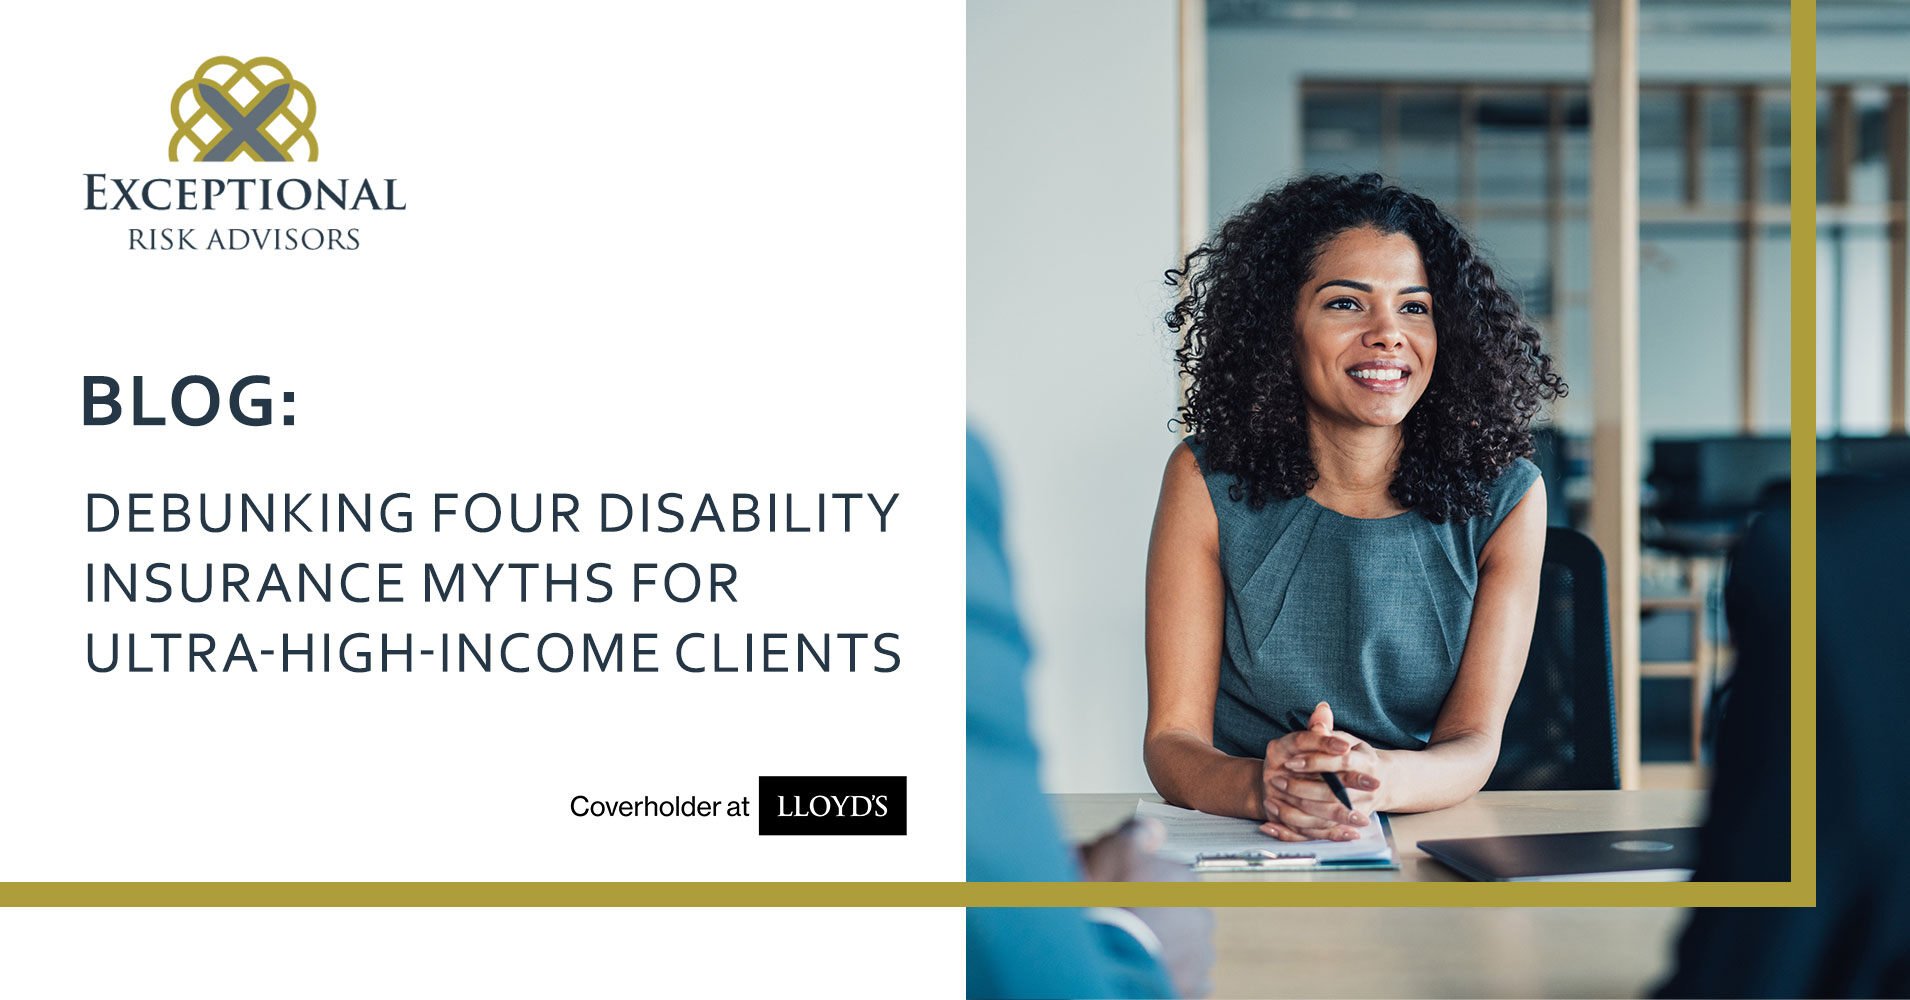 Debunking Four Disability Insurance Myths for Ultra-High-Income Clients